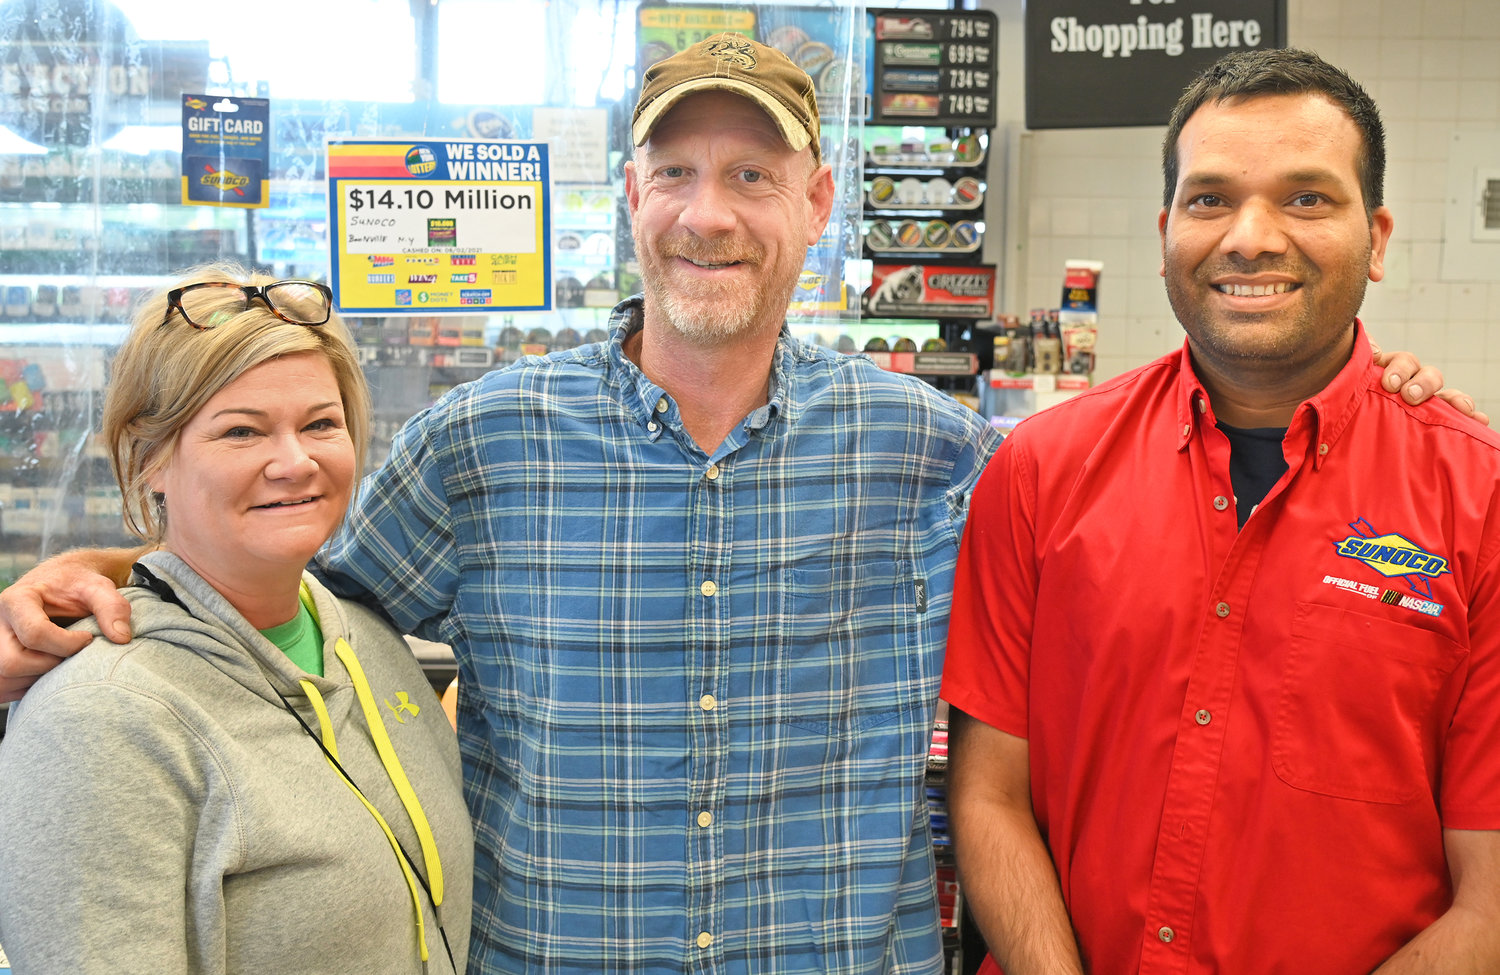 BIG WINNER — David Signor, middle, the winner of a $14 million lottery ticket is pictured with his girlfriend MacKenzie Earl, left, and Karam Singh, one of the store owners of the Boonville Sunoco.